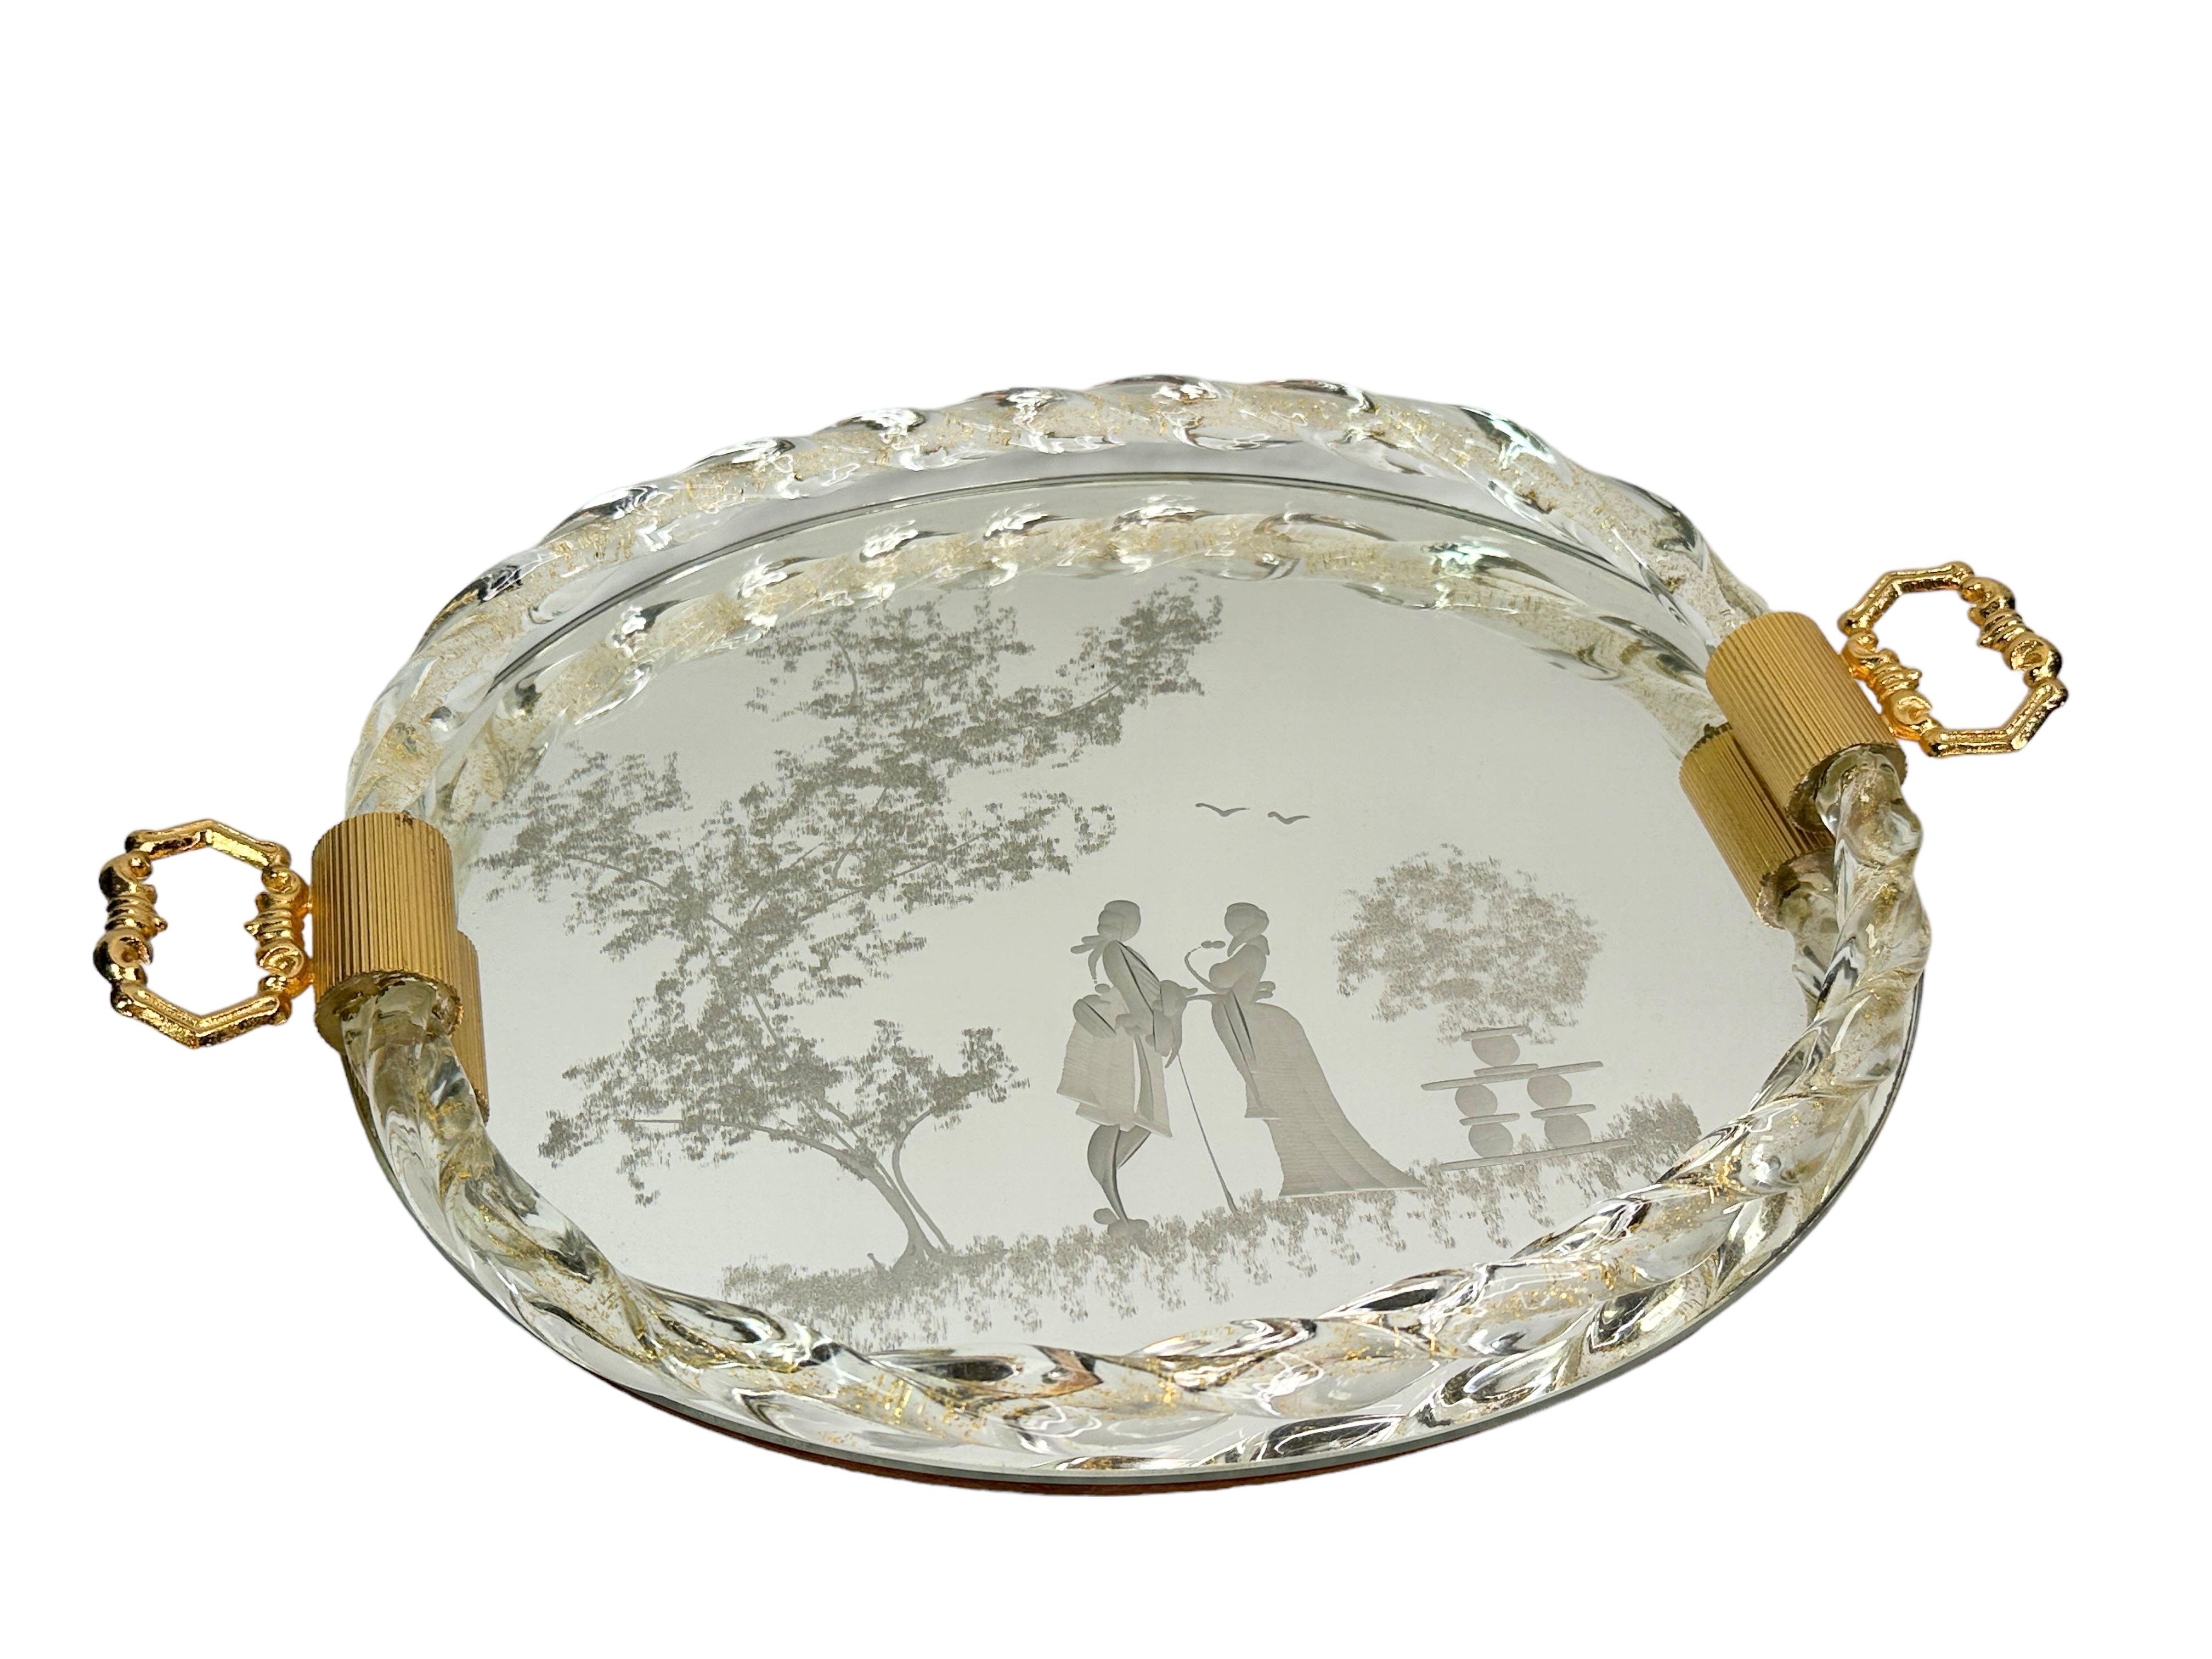 Hollywood Regency Etched Murano Glass Mirrored Tray by Ercole Barovier, Italy, 1960s For Sale